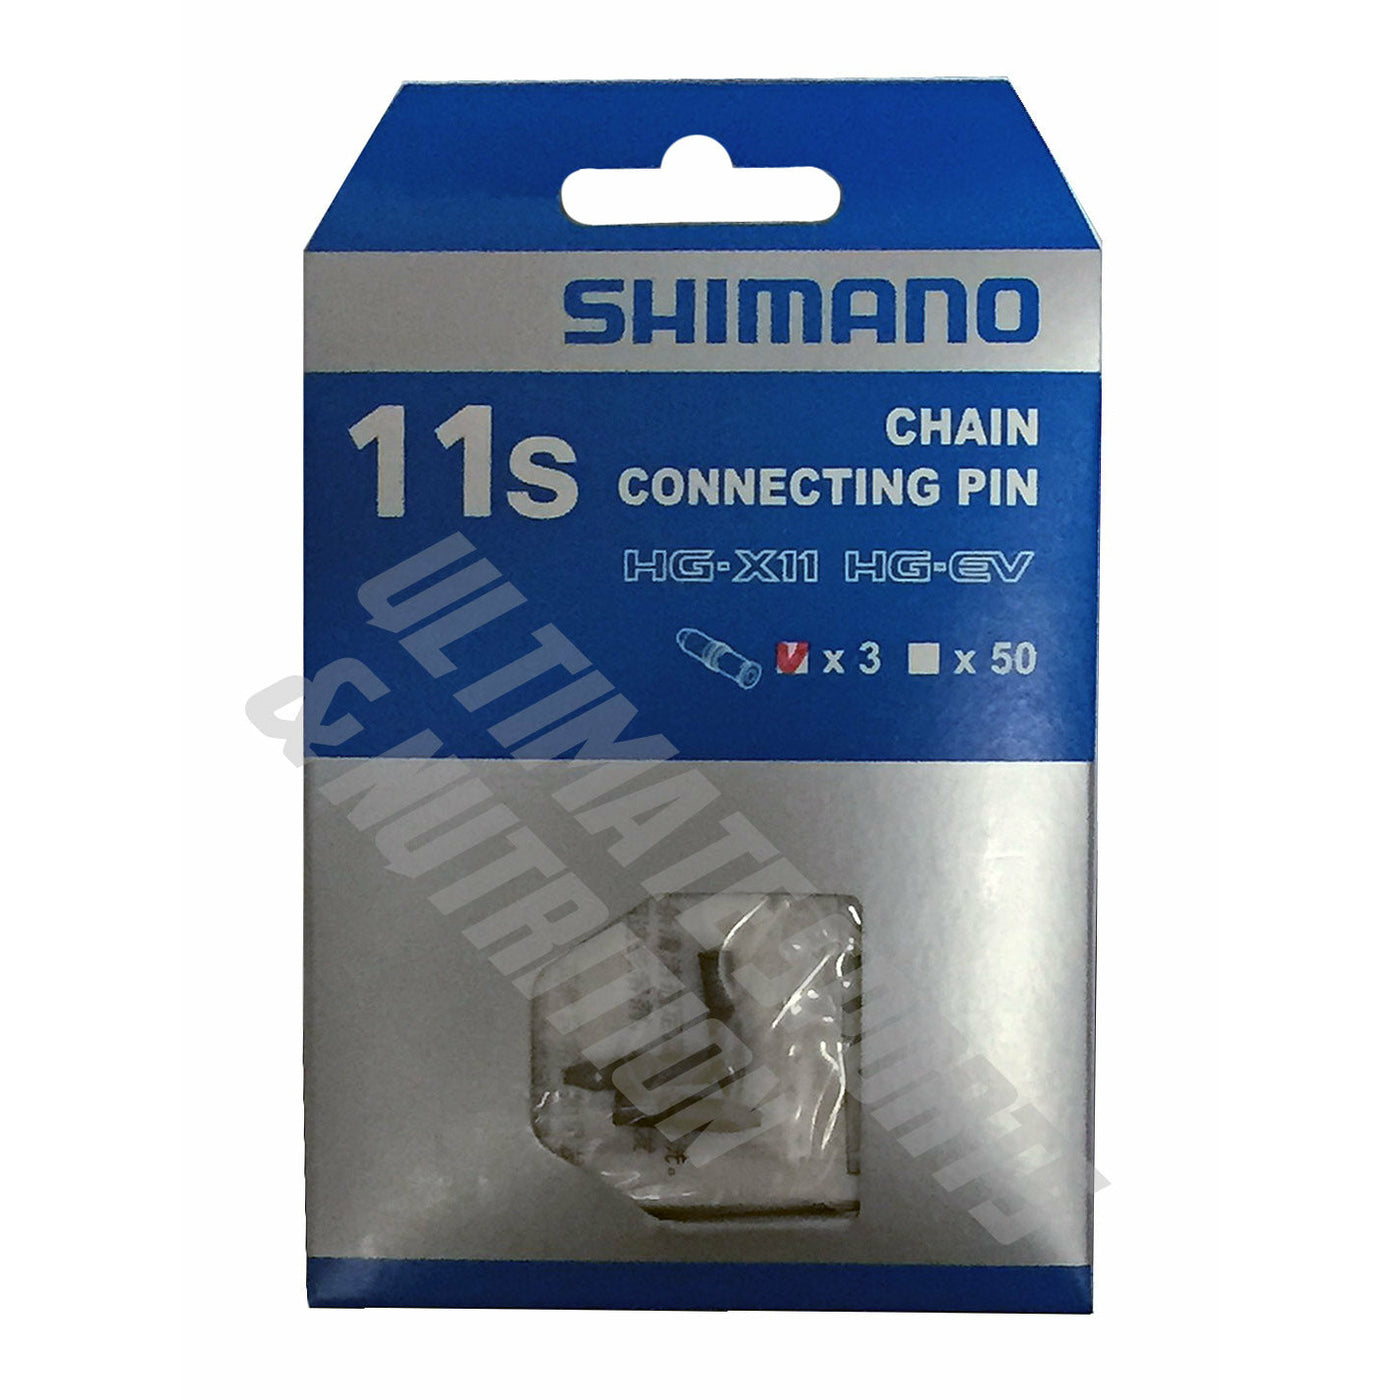 Shimano Dura Ace CN-9000 11 Speed Connecting Chain Pin Connecting Link 11s 3 Pk